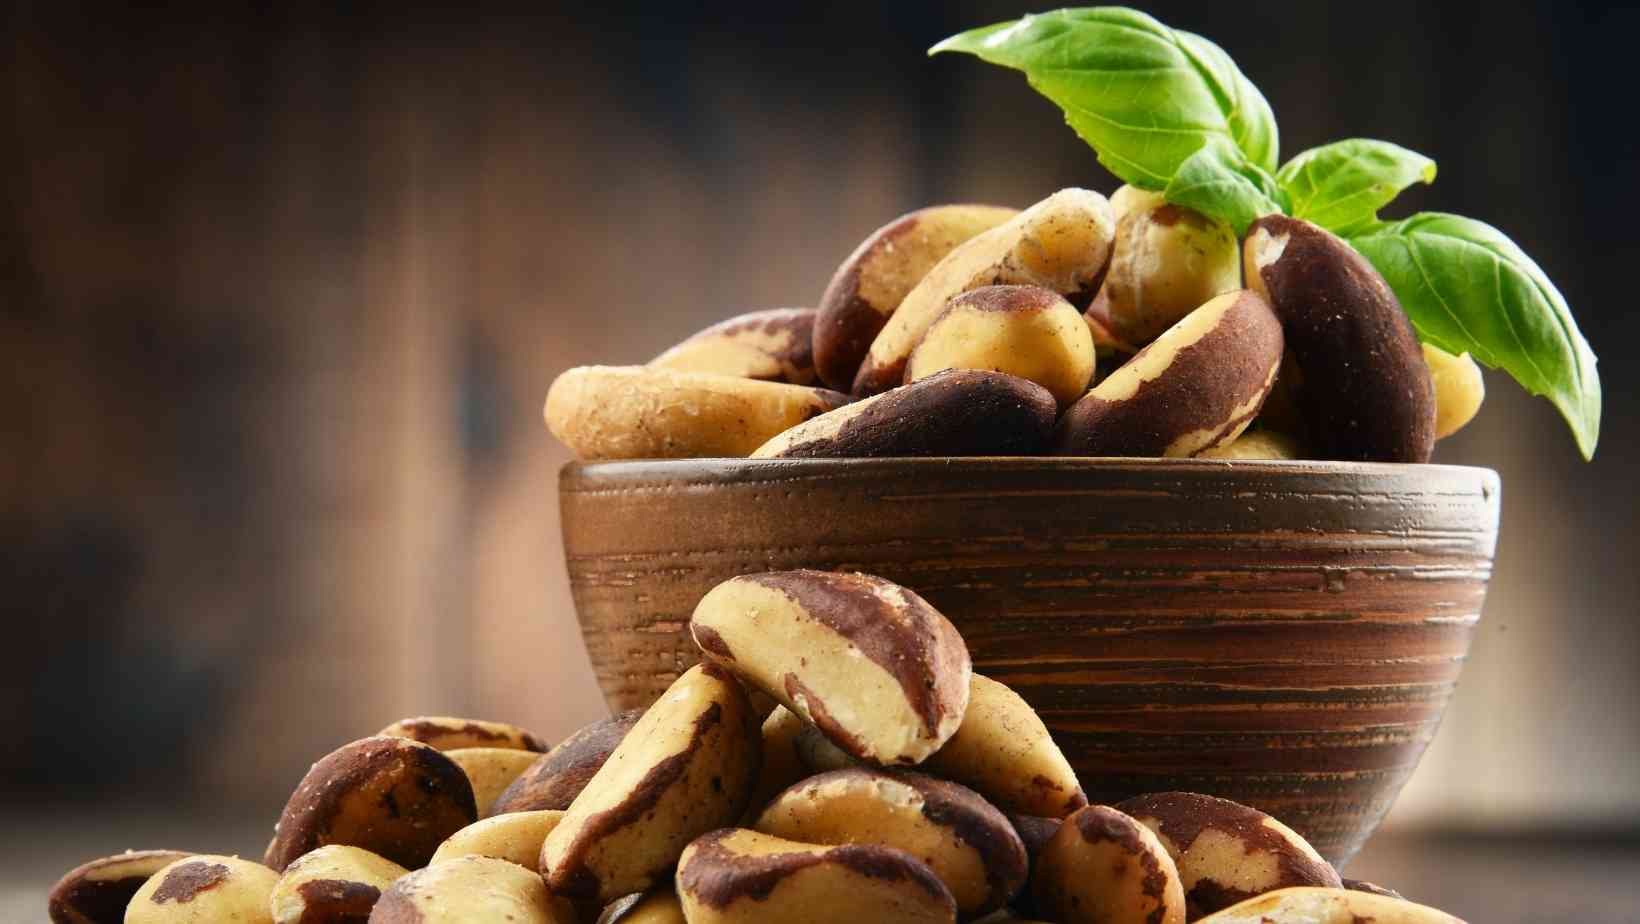 Brazil Nuts - Food to Eat to Lower Your Risk of Depression